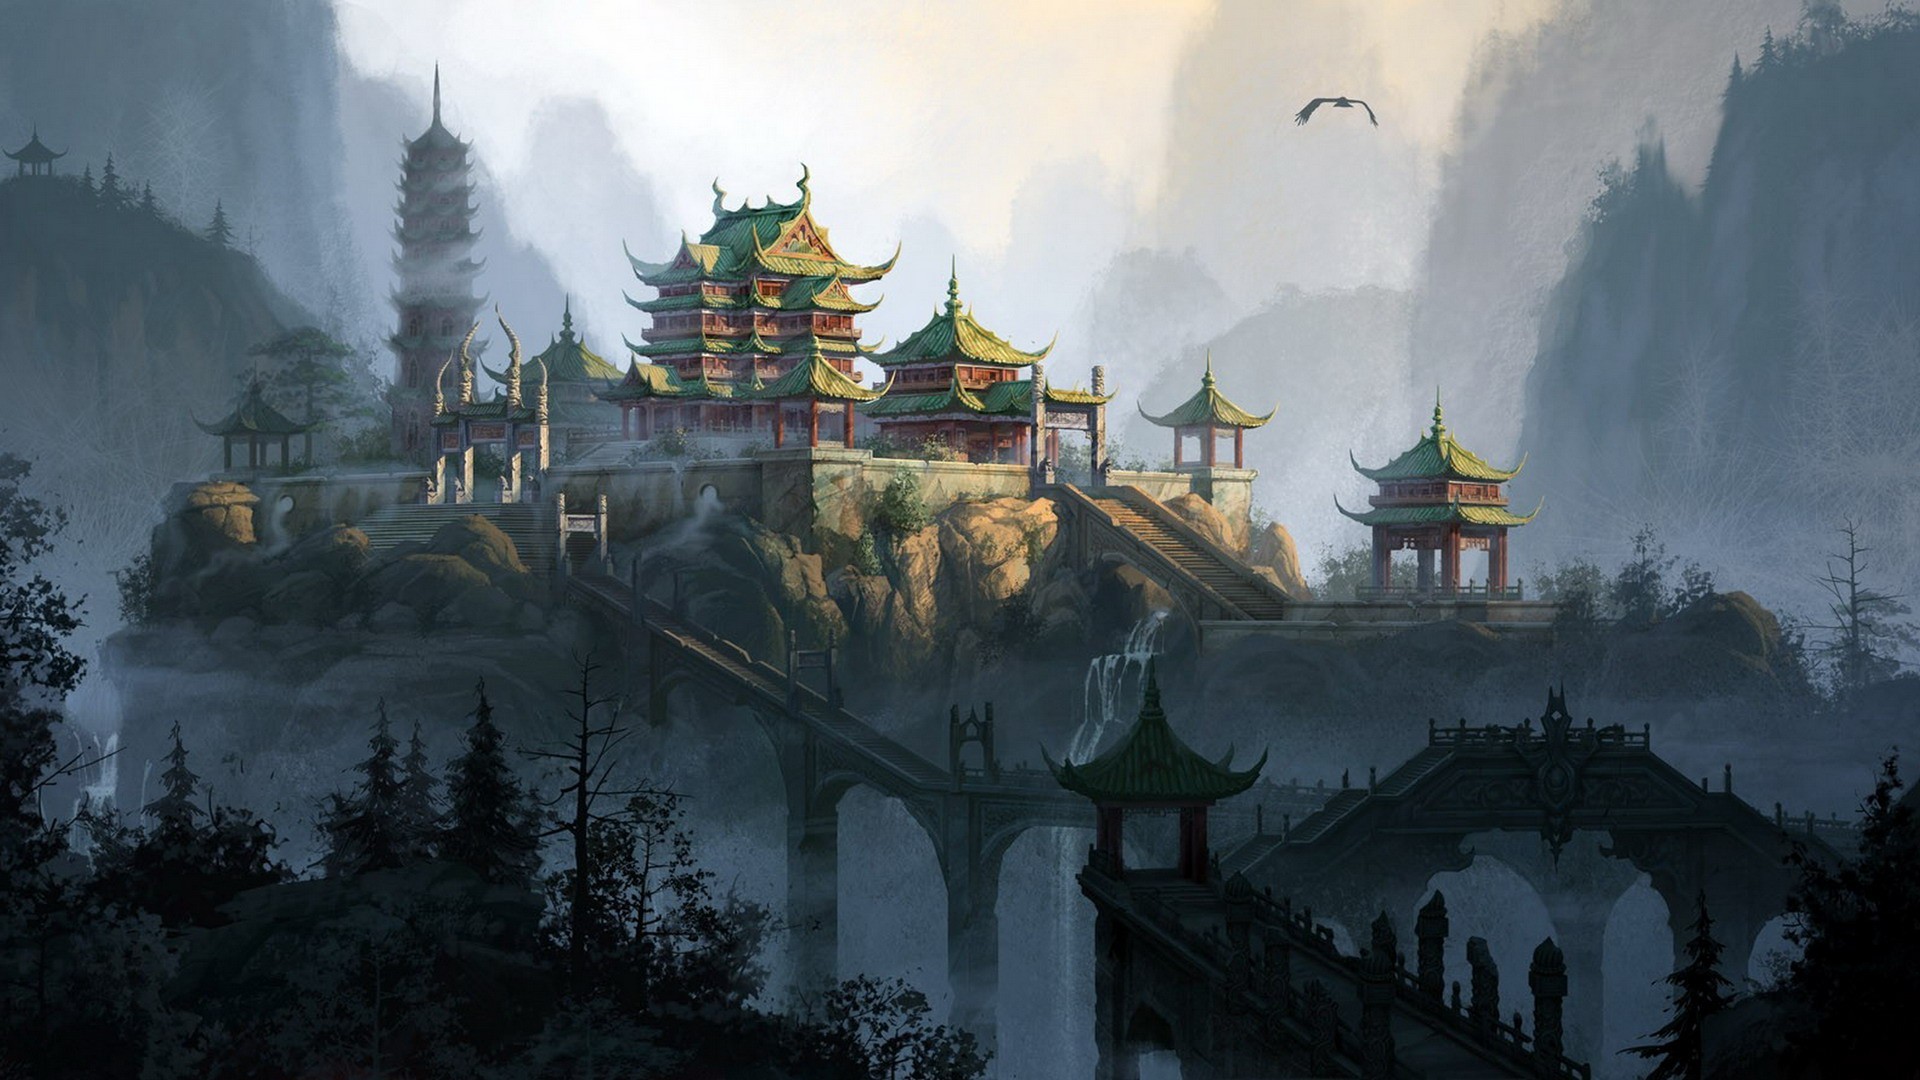 1920x1080 Living room bedroom home wall decoration fabric poster anime Asian  architecture mountain flying birds